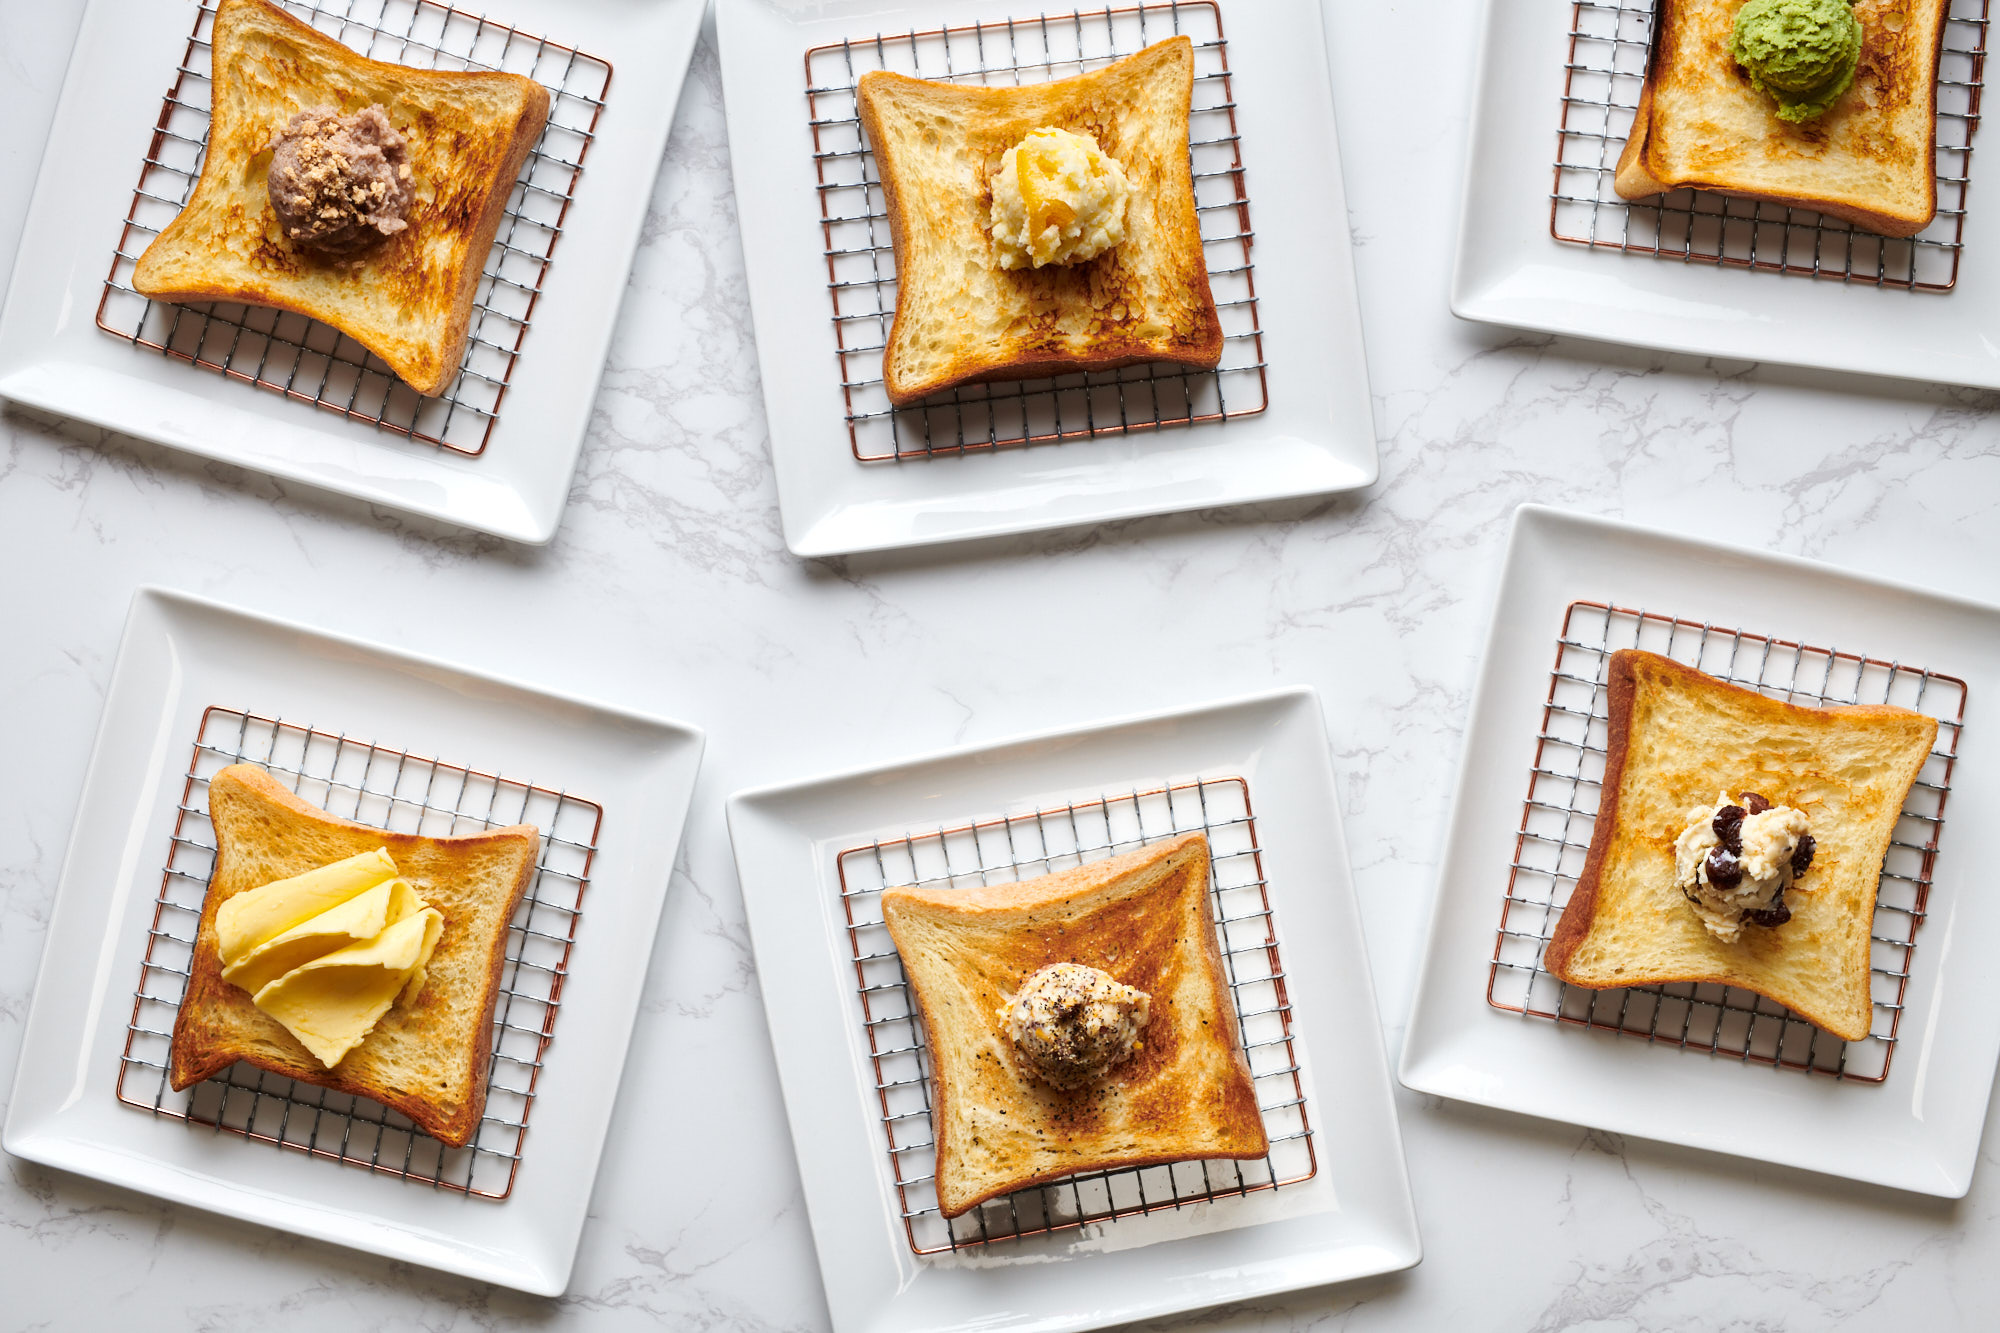 Six pieces of shokupan toast sit on a white marble counter under grates at Kimura Toast Bar